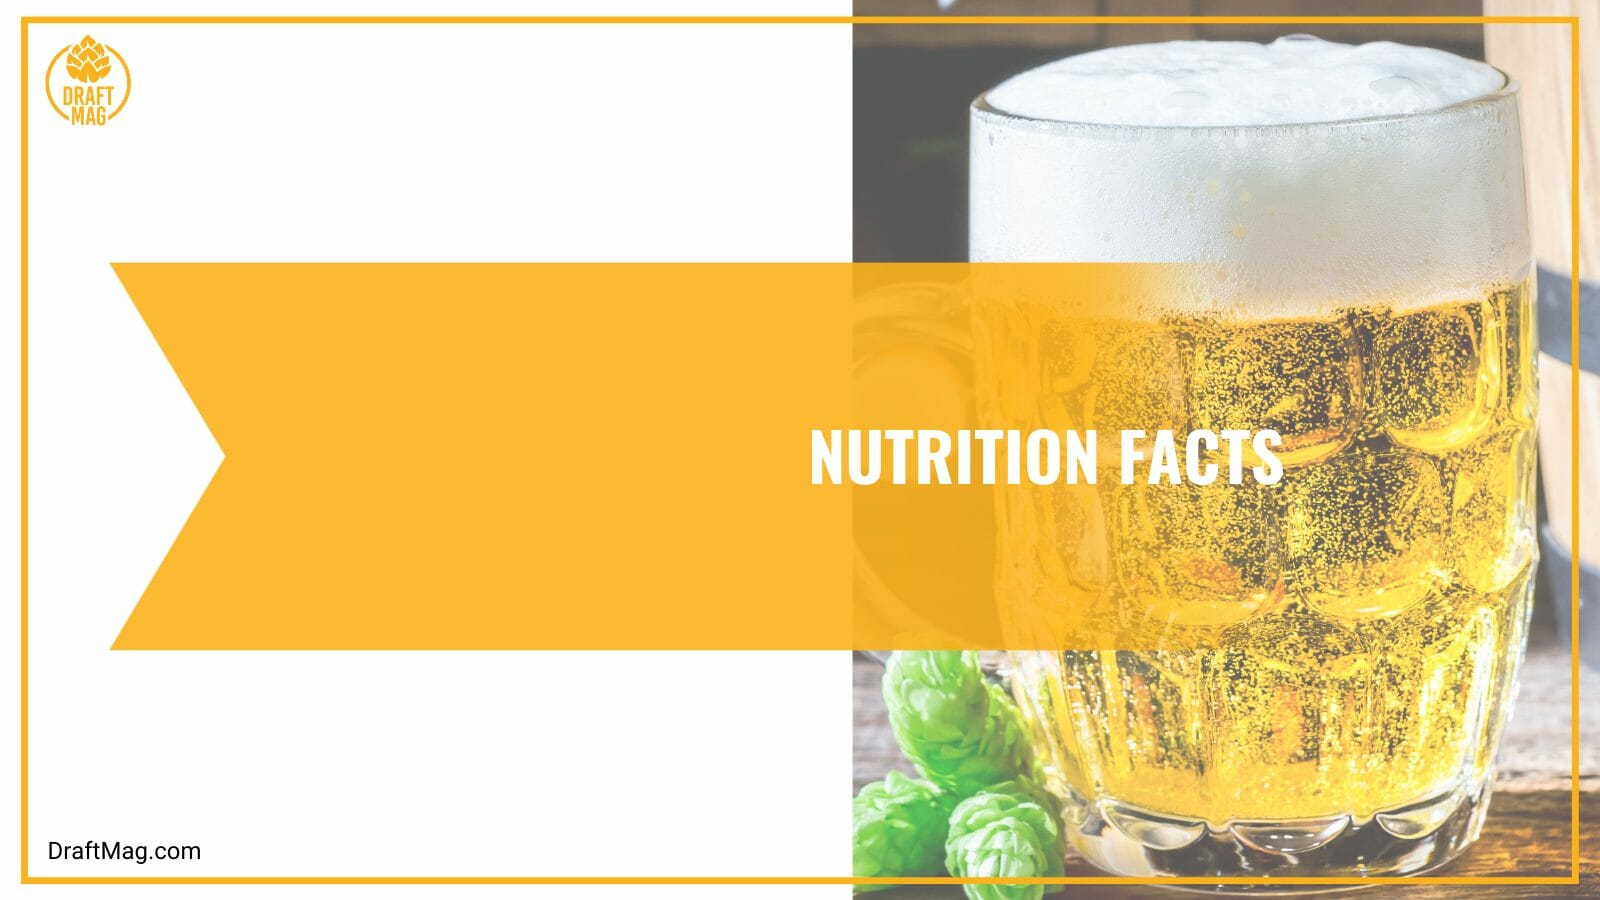 Nutrition Facts of Dr Robot Beer